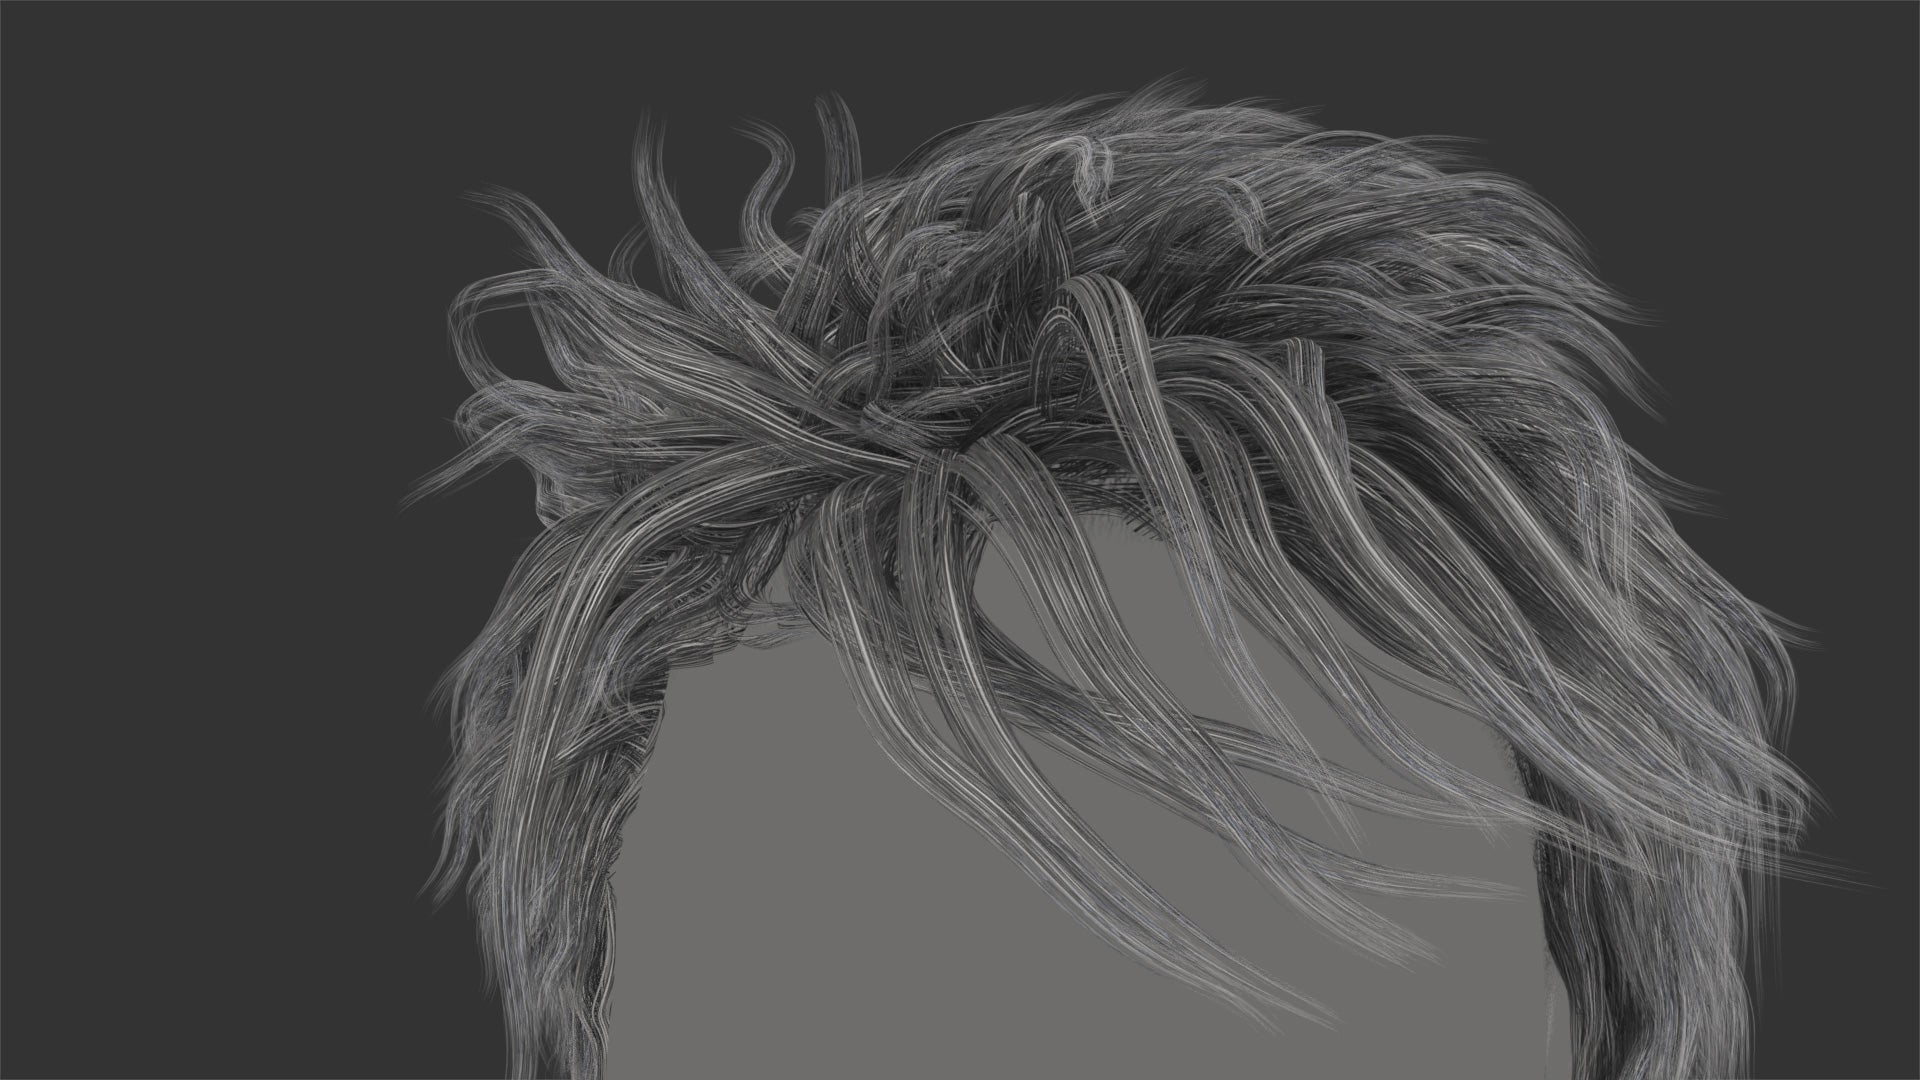 3d model of a cool and messy hair style, made with mesh cards, low polycount, and PBR textures